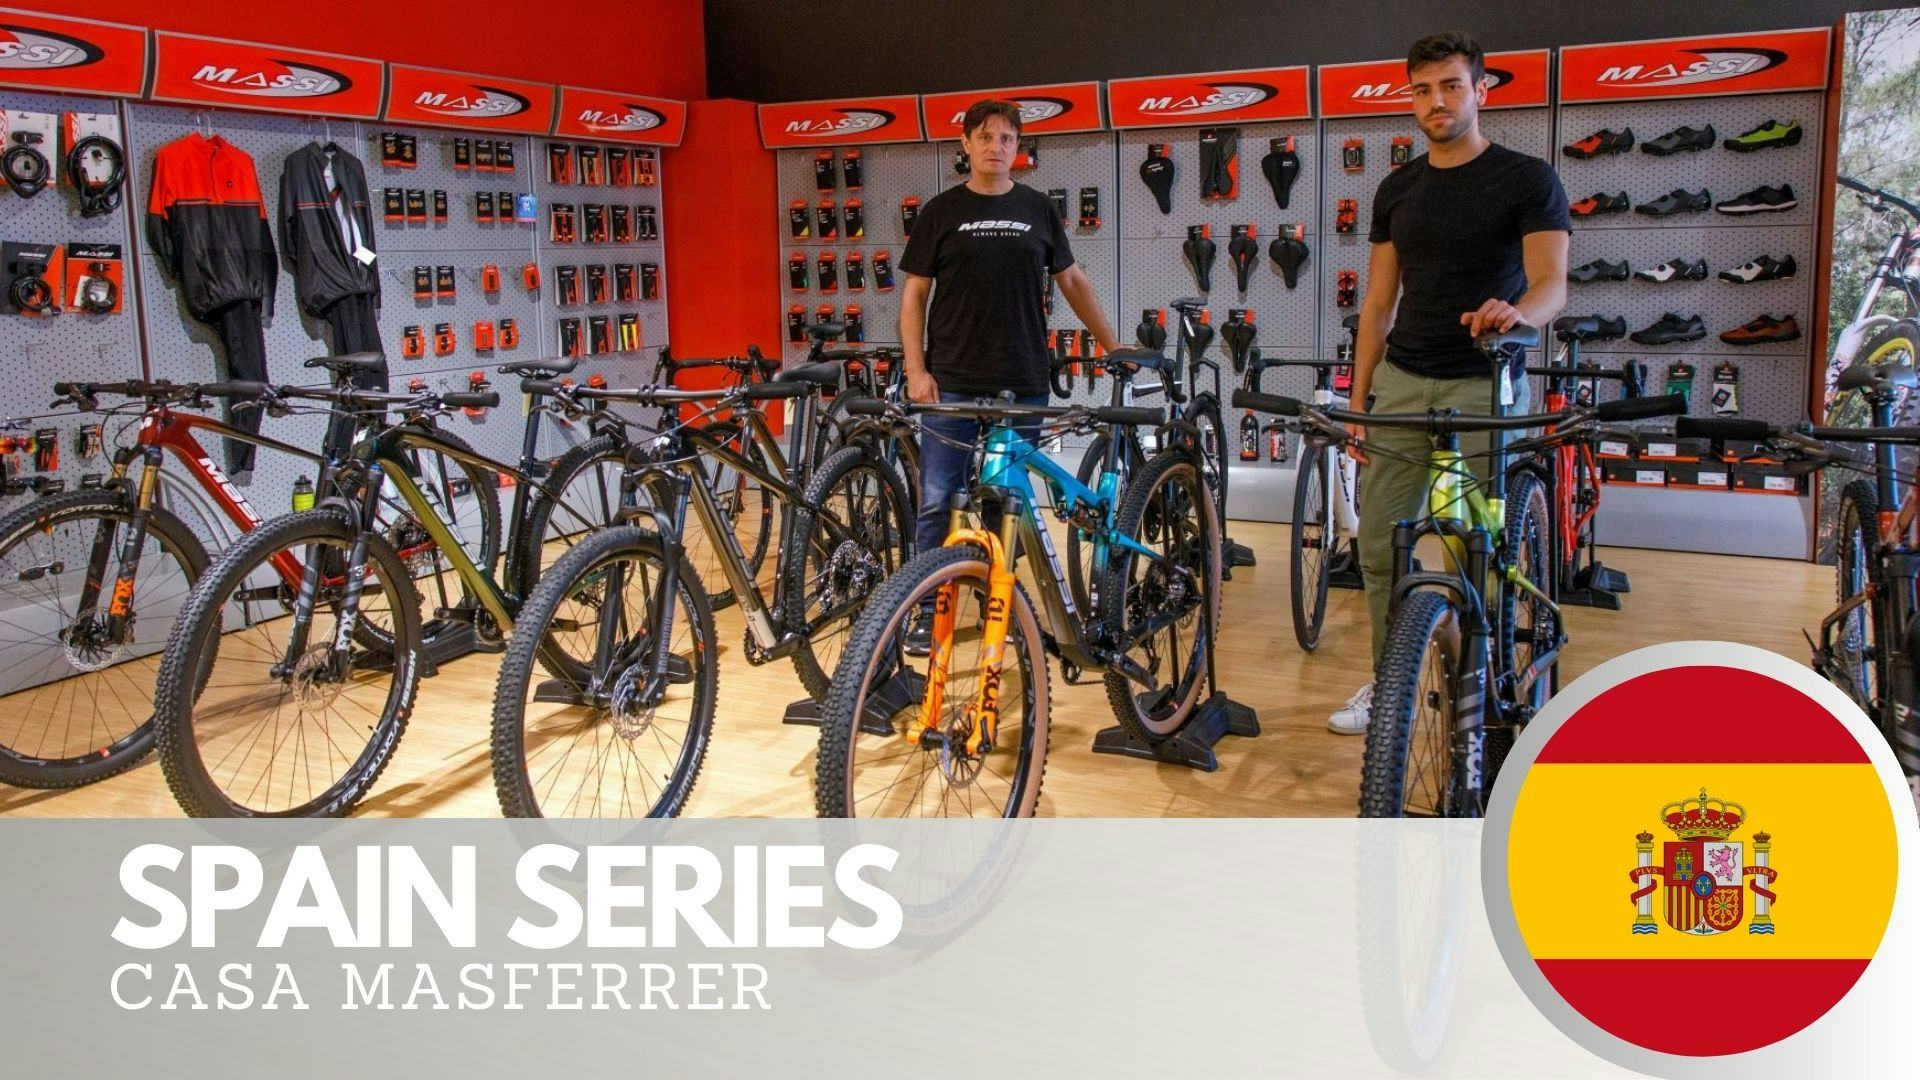 Casa Masferrer managing director Jaume Masferrer (left) and marketing manager Marc Ganduxe at the Massi showroom at the company headquarters in Granollers. – Photo Dieter Wertz